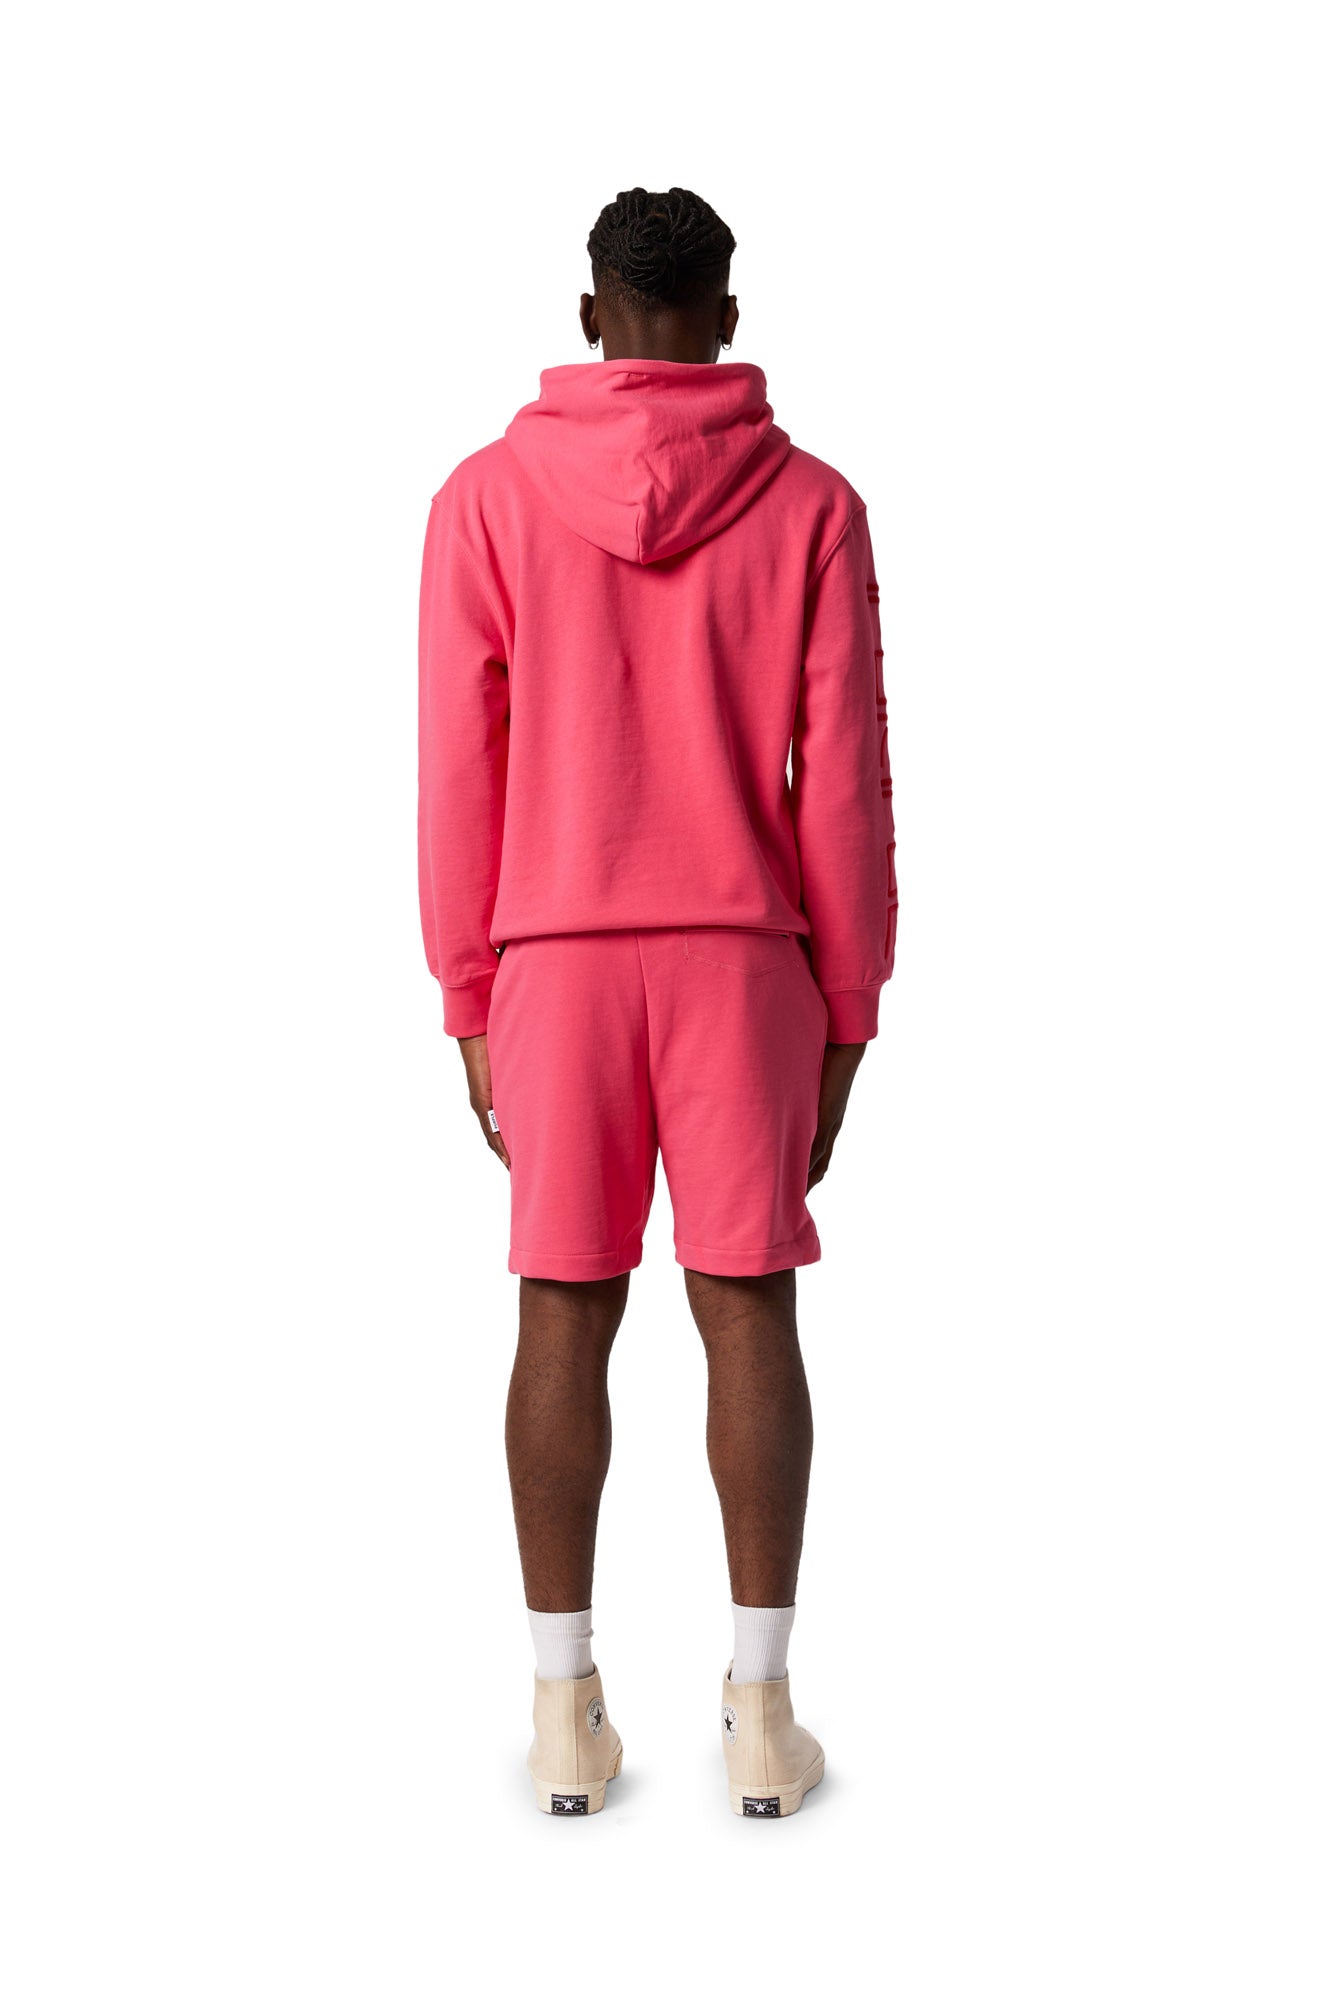 P413 RELAXED FIT SHORT - Wordmark Hot Pink